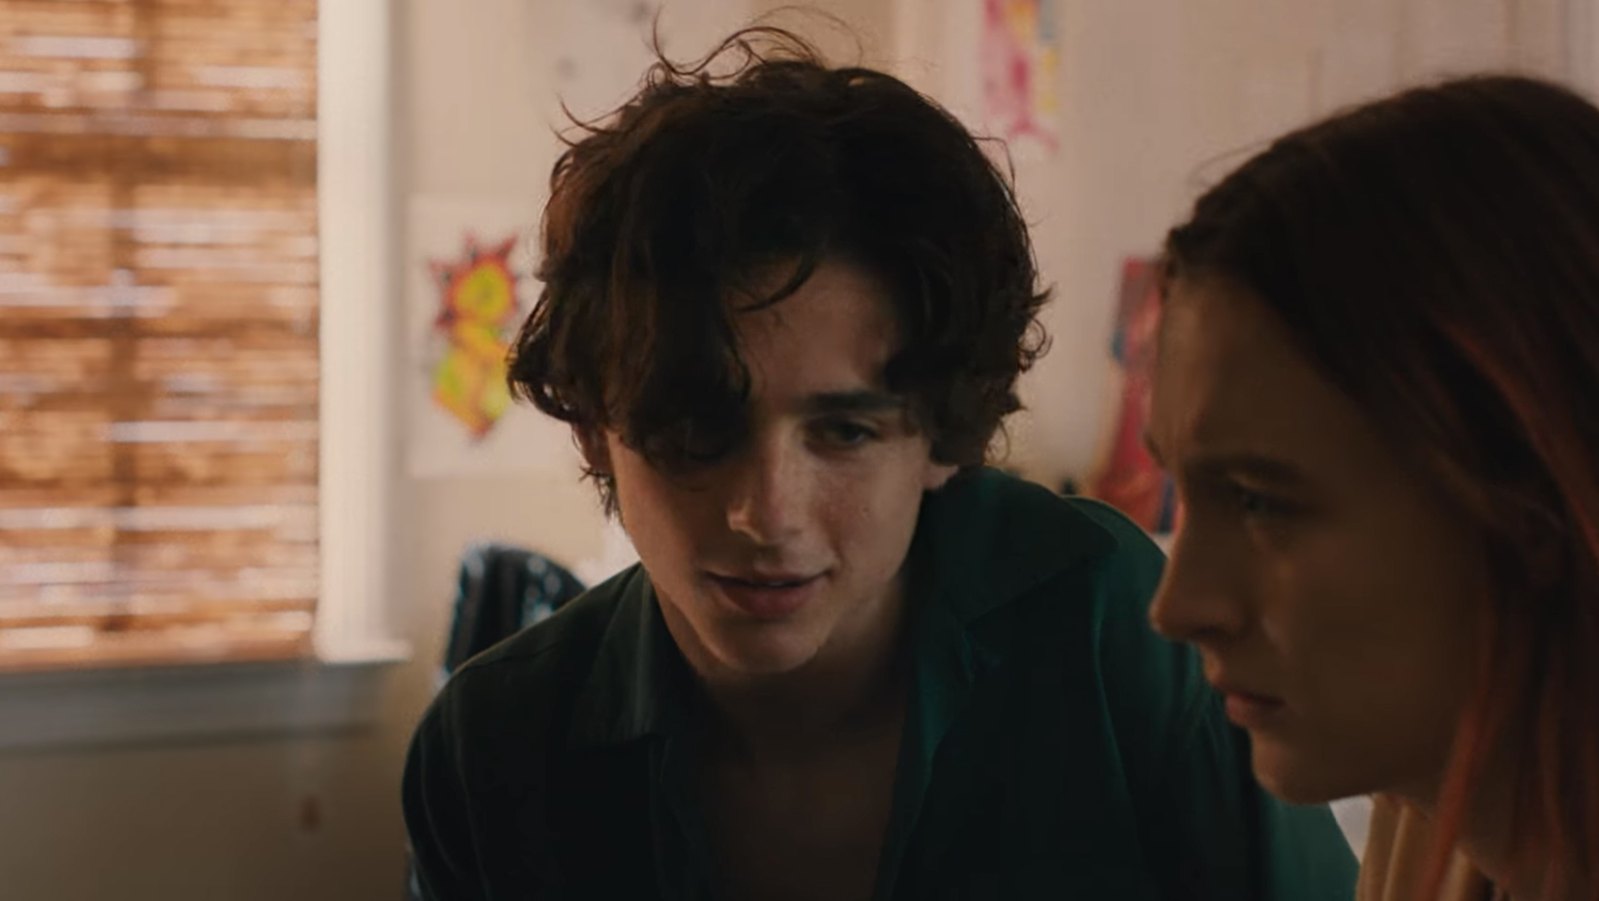 Timothee Chalamet Rise From Theater Kid to Critical Darling